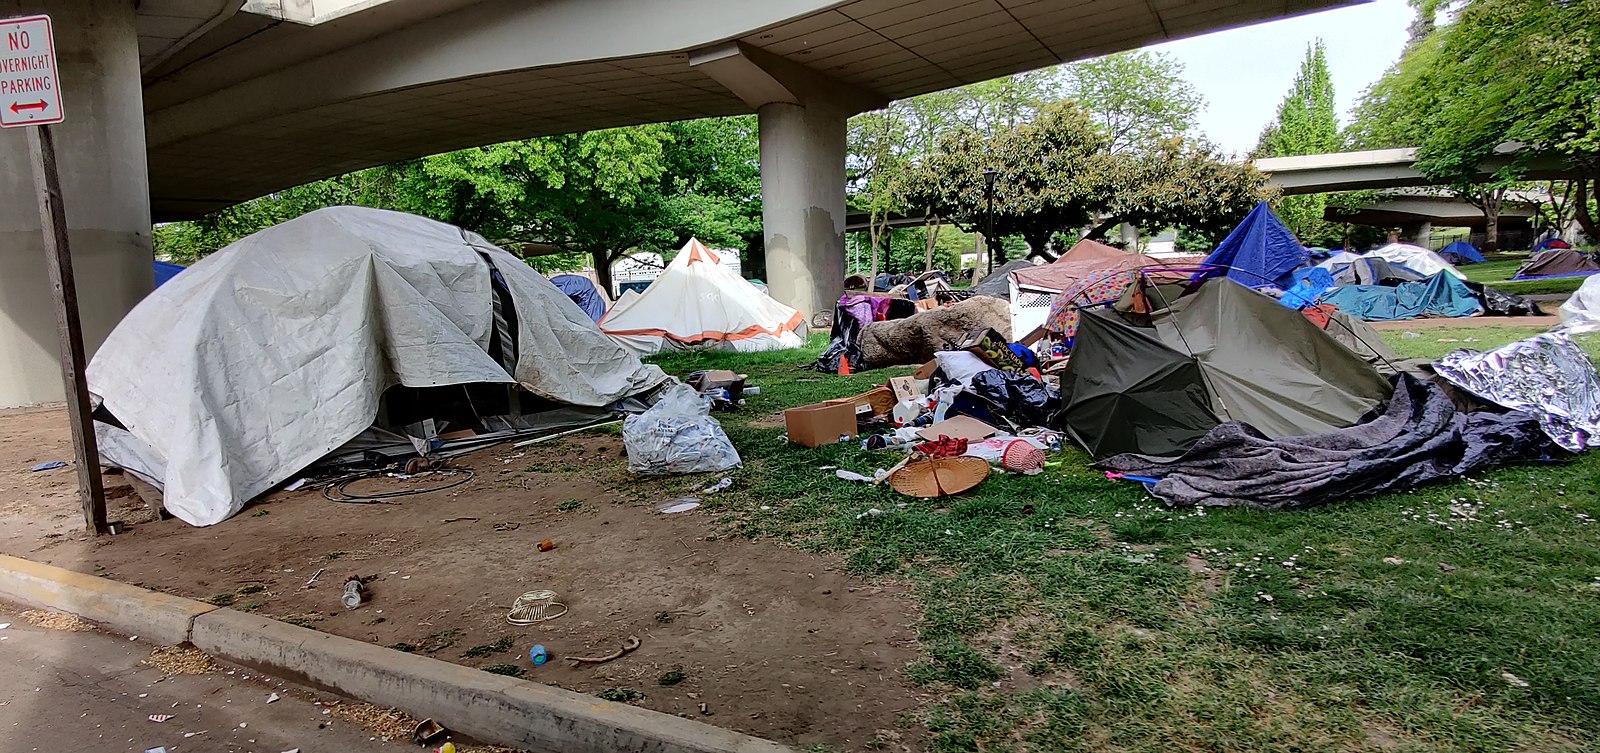 US Supreme Court split on whether to allow broader punishment for people camping in public spaces